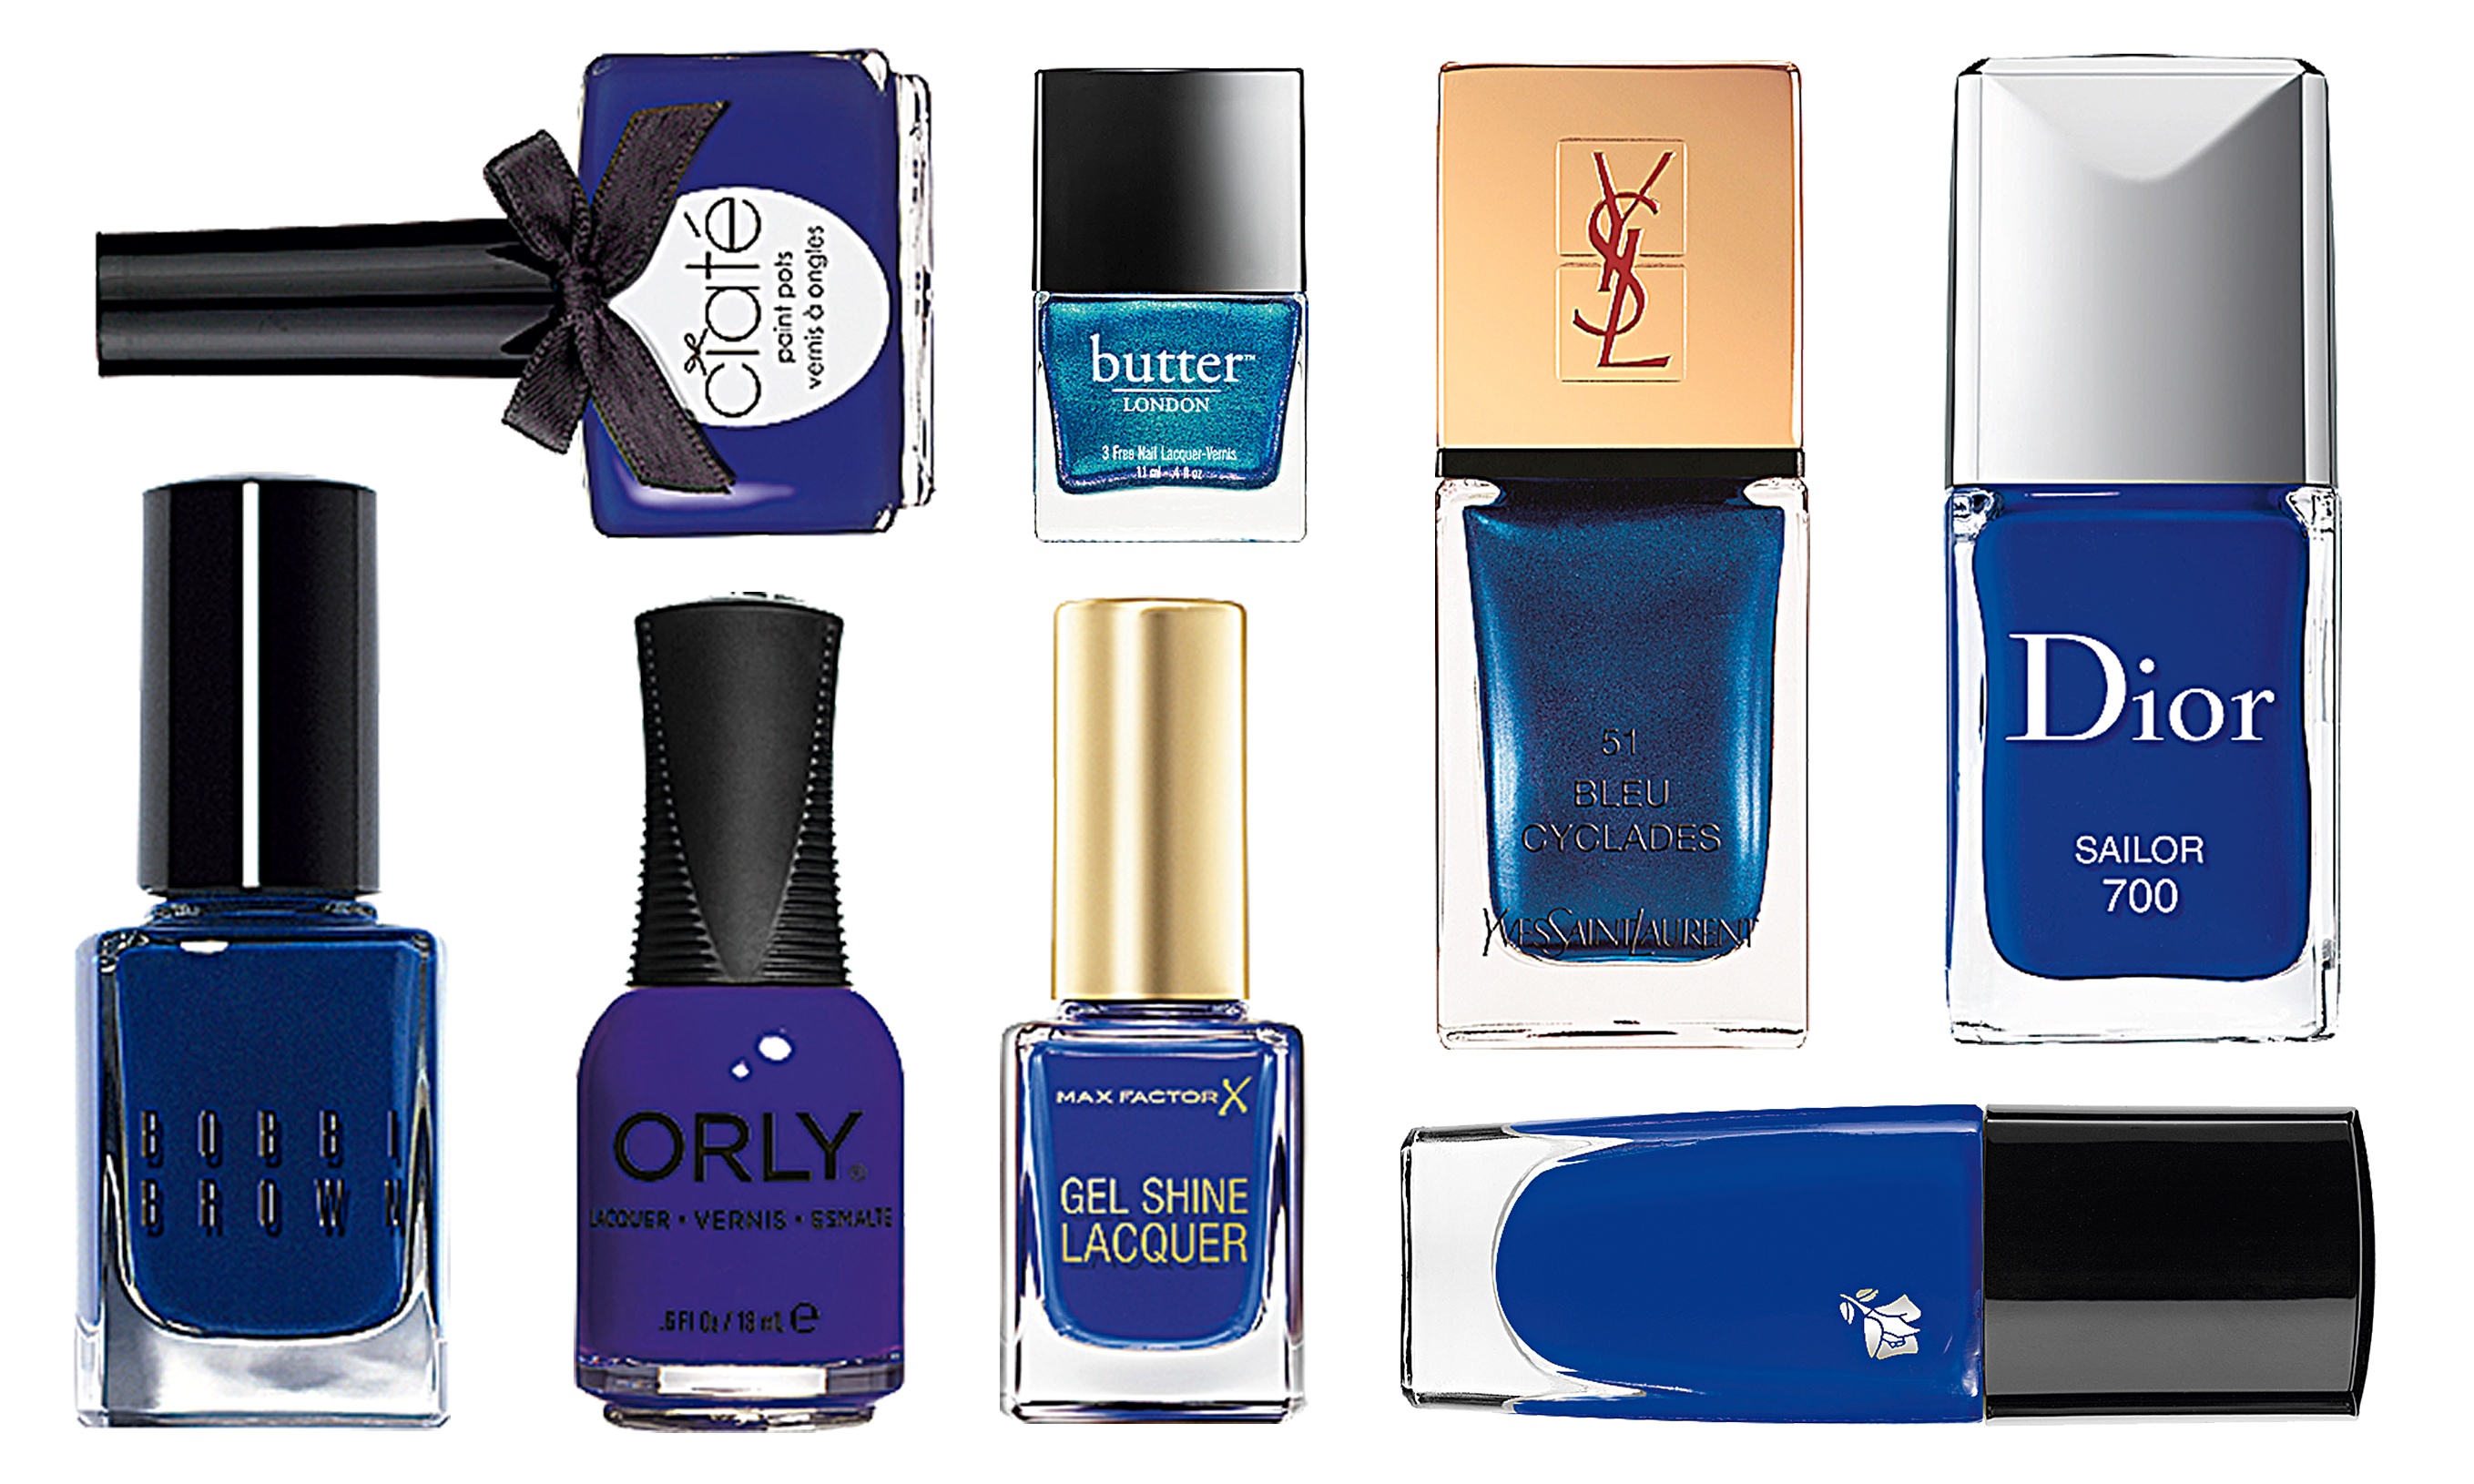 The best blue nail varnishes | Life and style | The Guardian